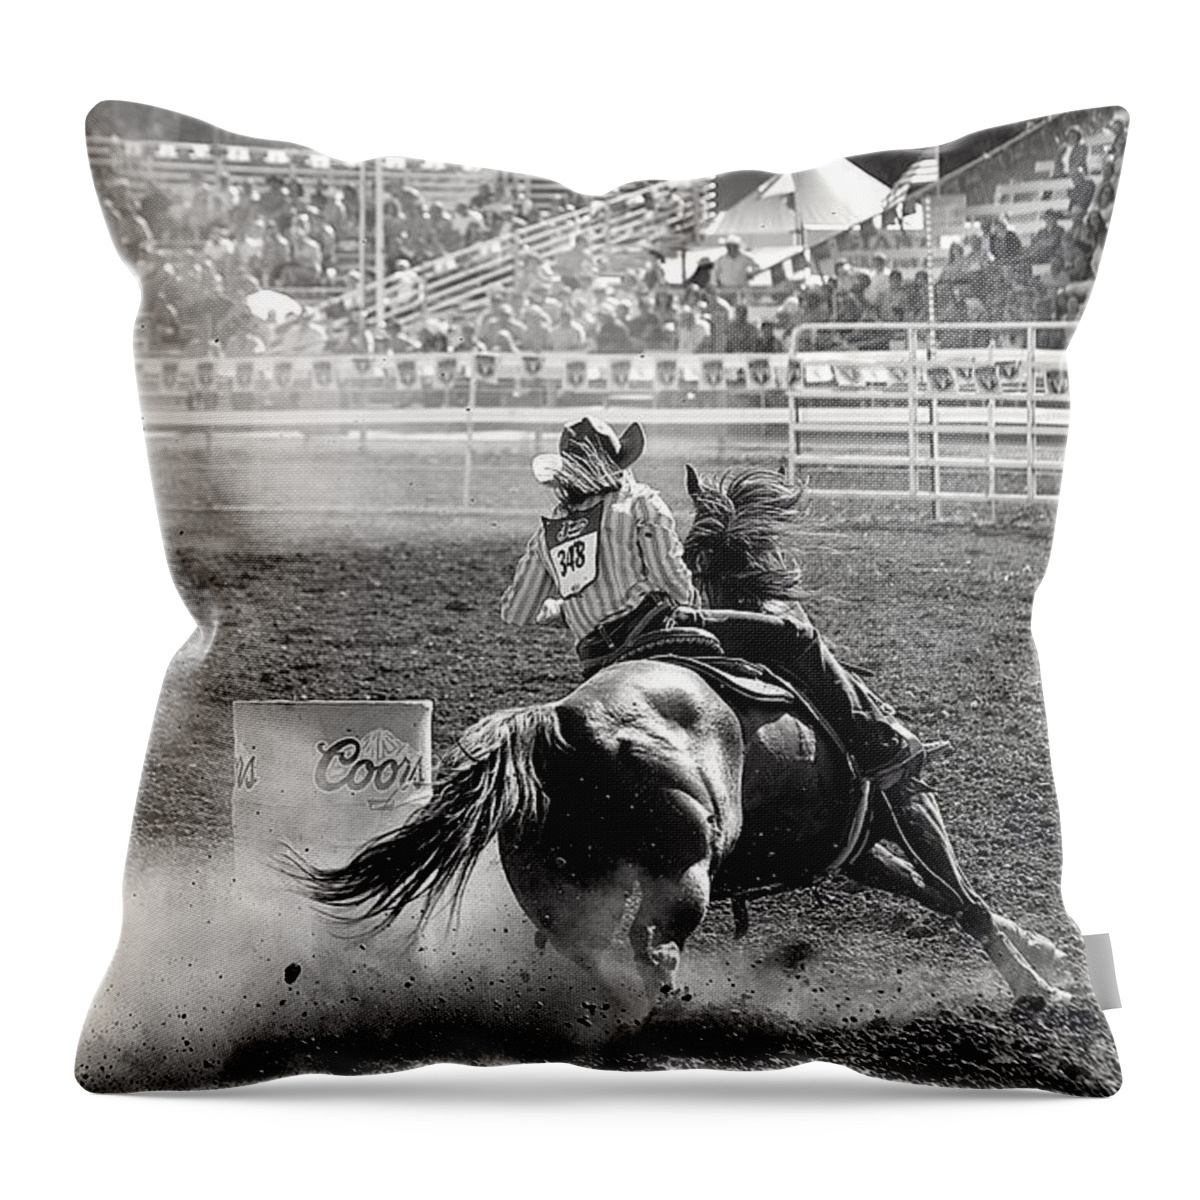 Barrel Racer Throw Pillow featuring the photograph Barrel Racer by Maria Jansson